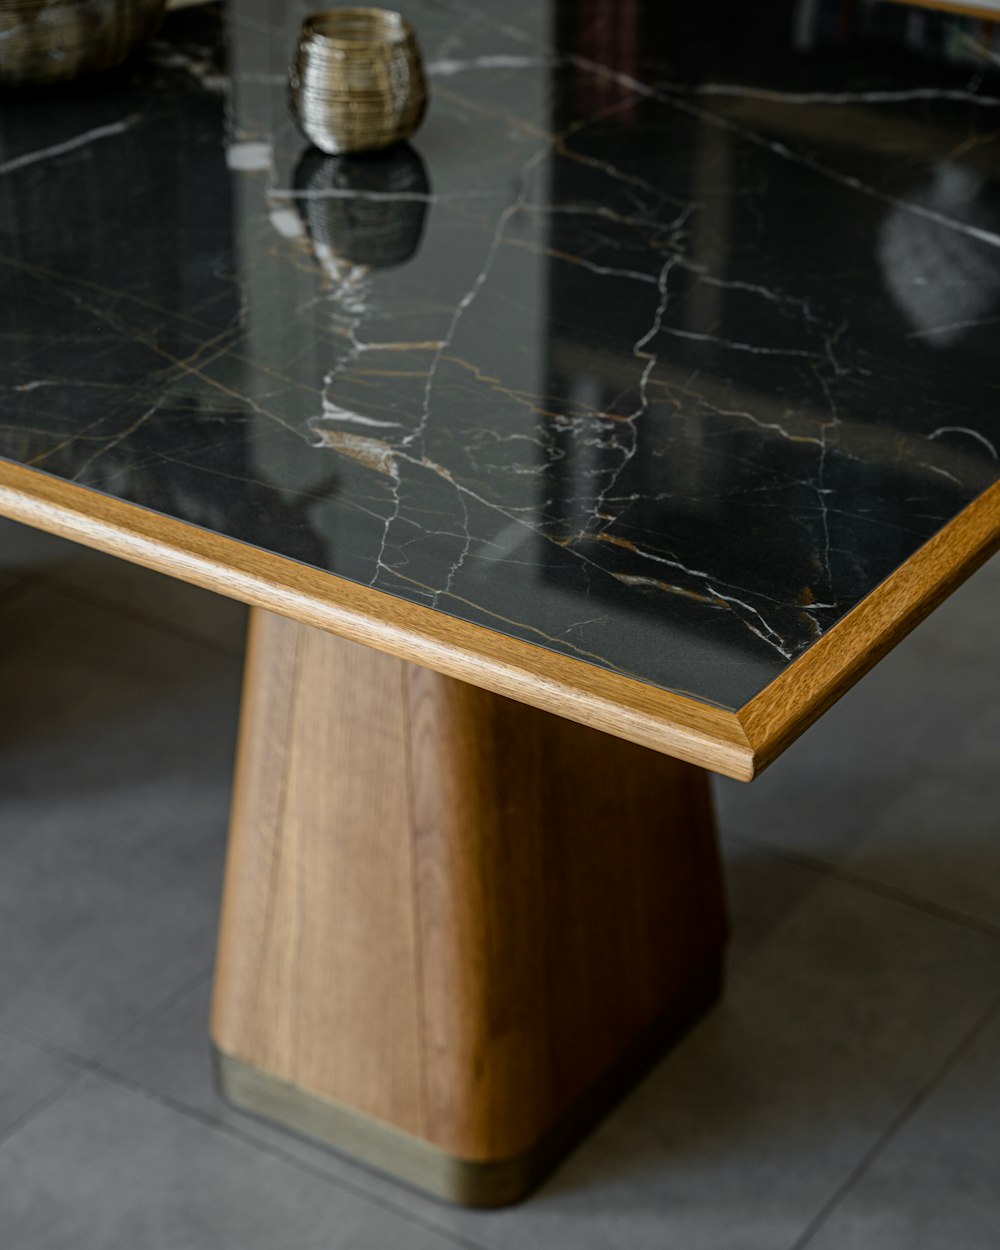 a marble top table with a wooden base